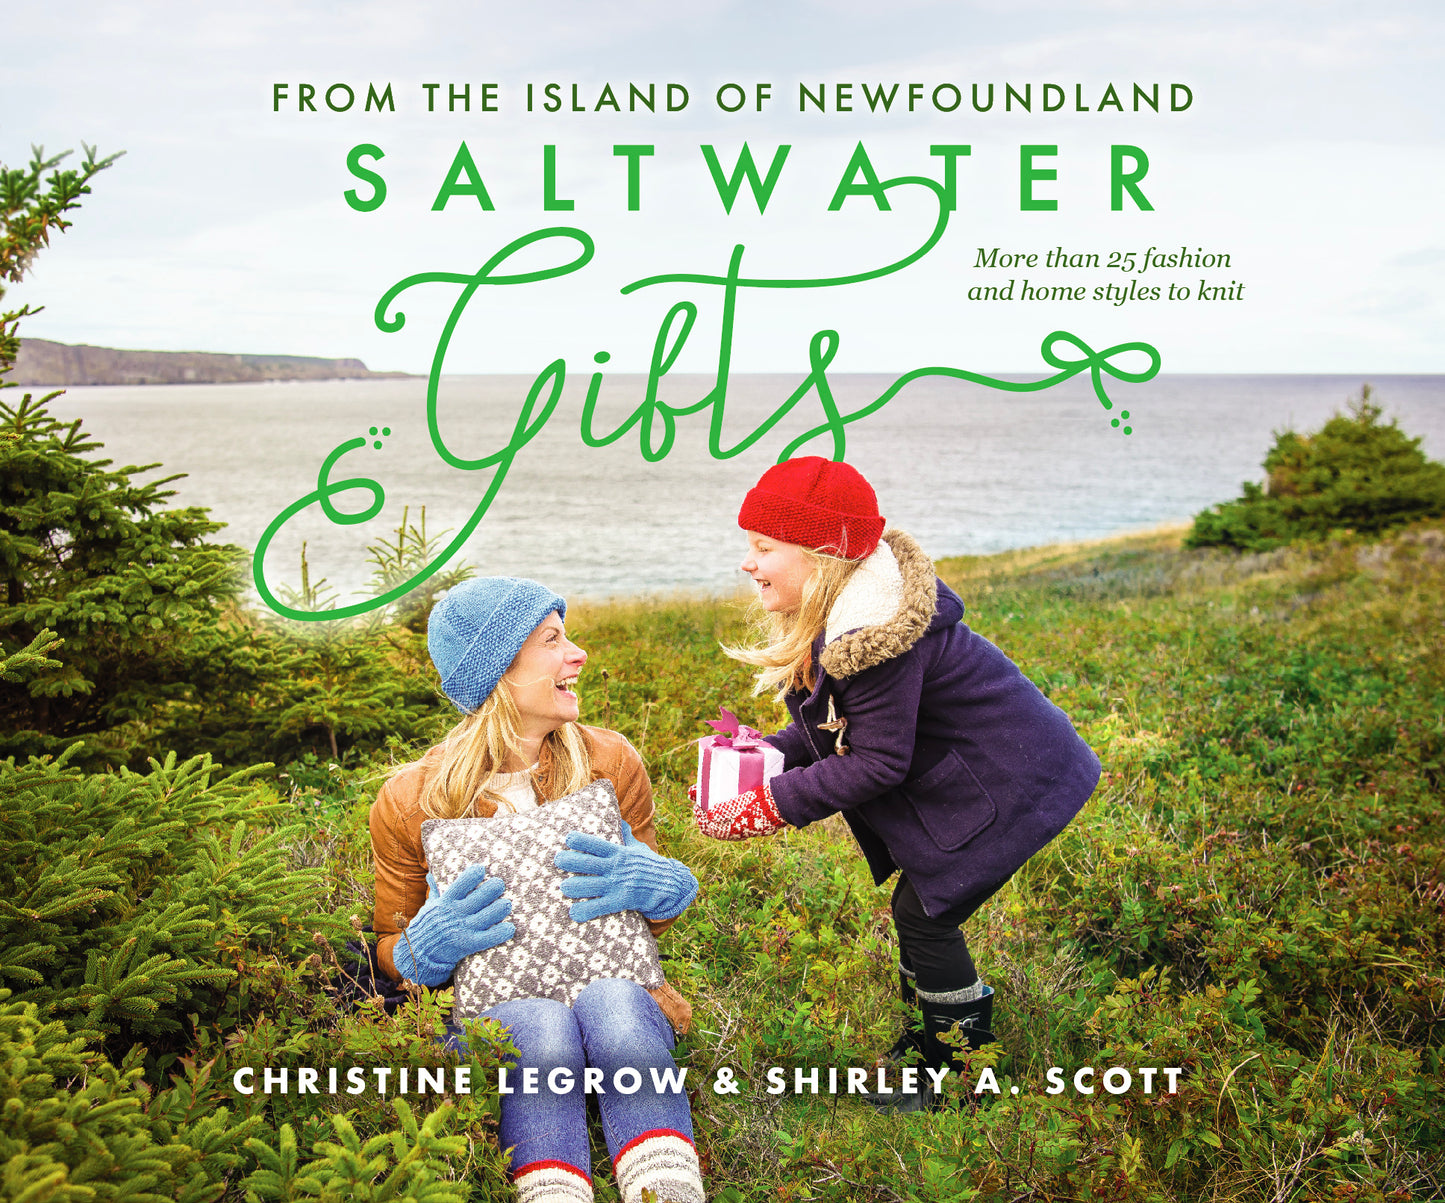 Saltwater Gifts by Christine LeGrow & Shirley A. Scott